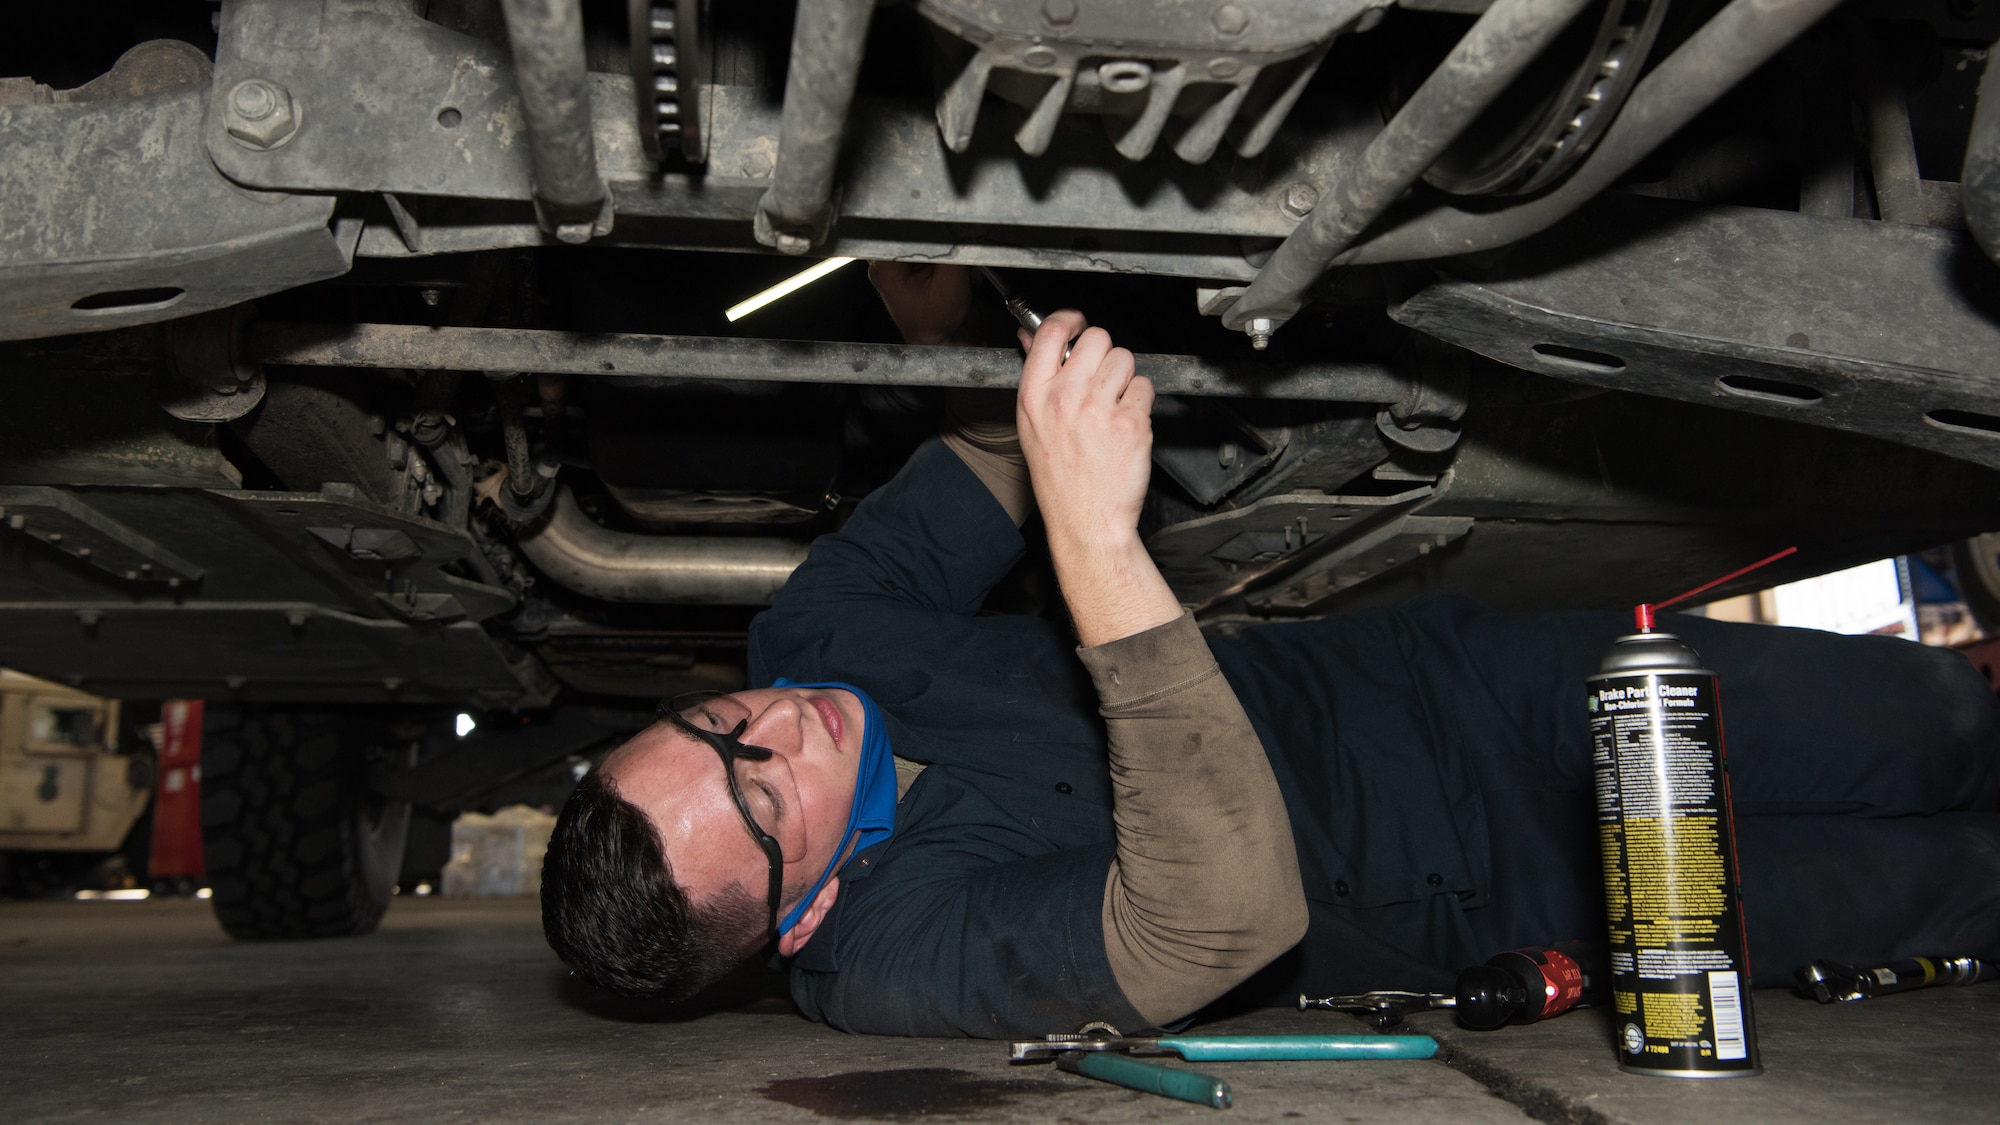 Airman 1st Class Adam Chesser, 509th Logistics Readiness Squadron vehicle maintenance technician, works on the propeller shaft on the bottom of a Humvee.